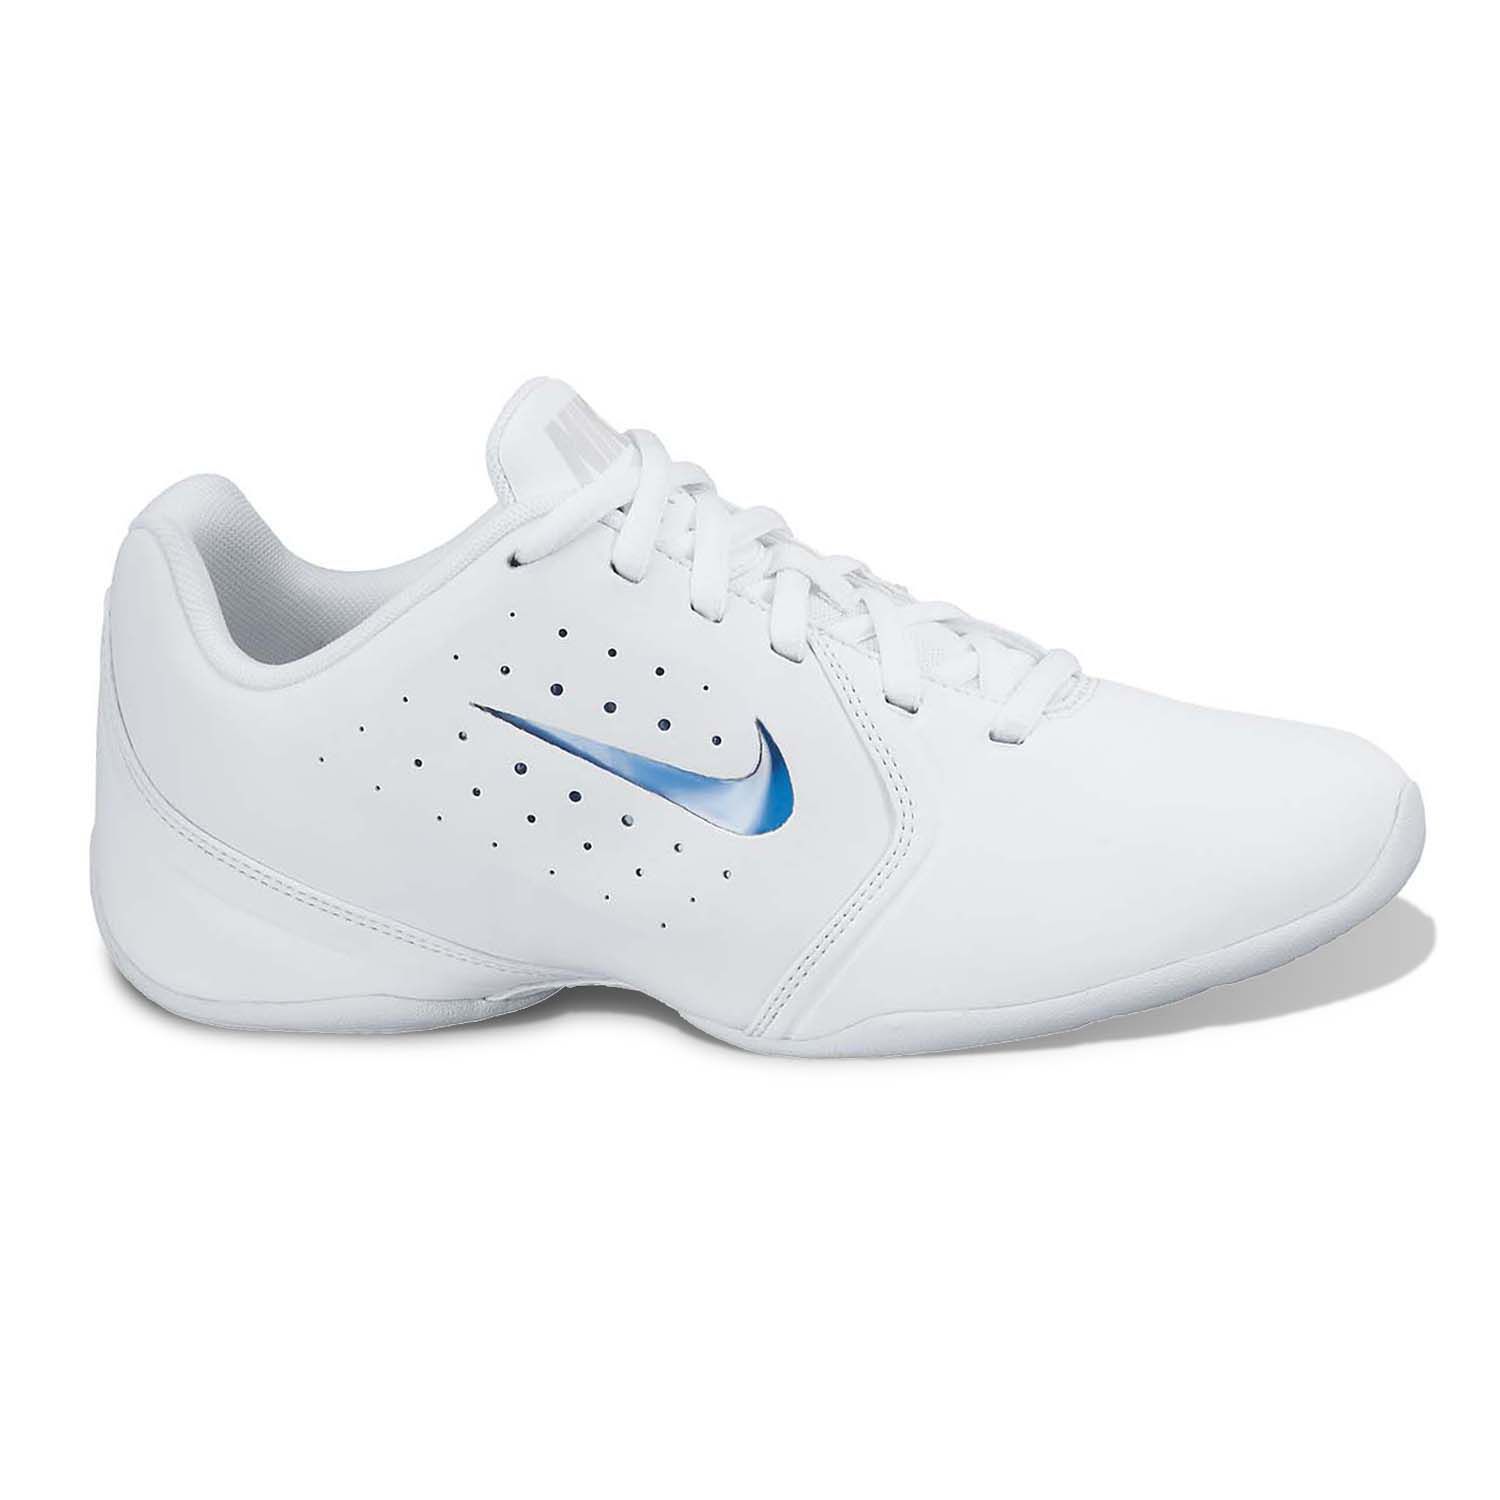 nike cheer shoes with color inserts